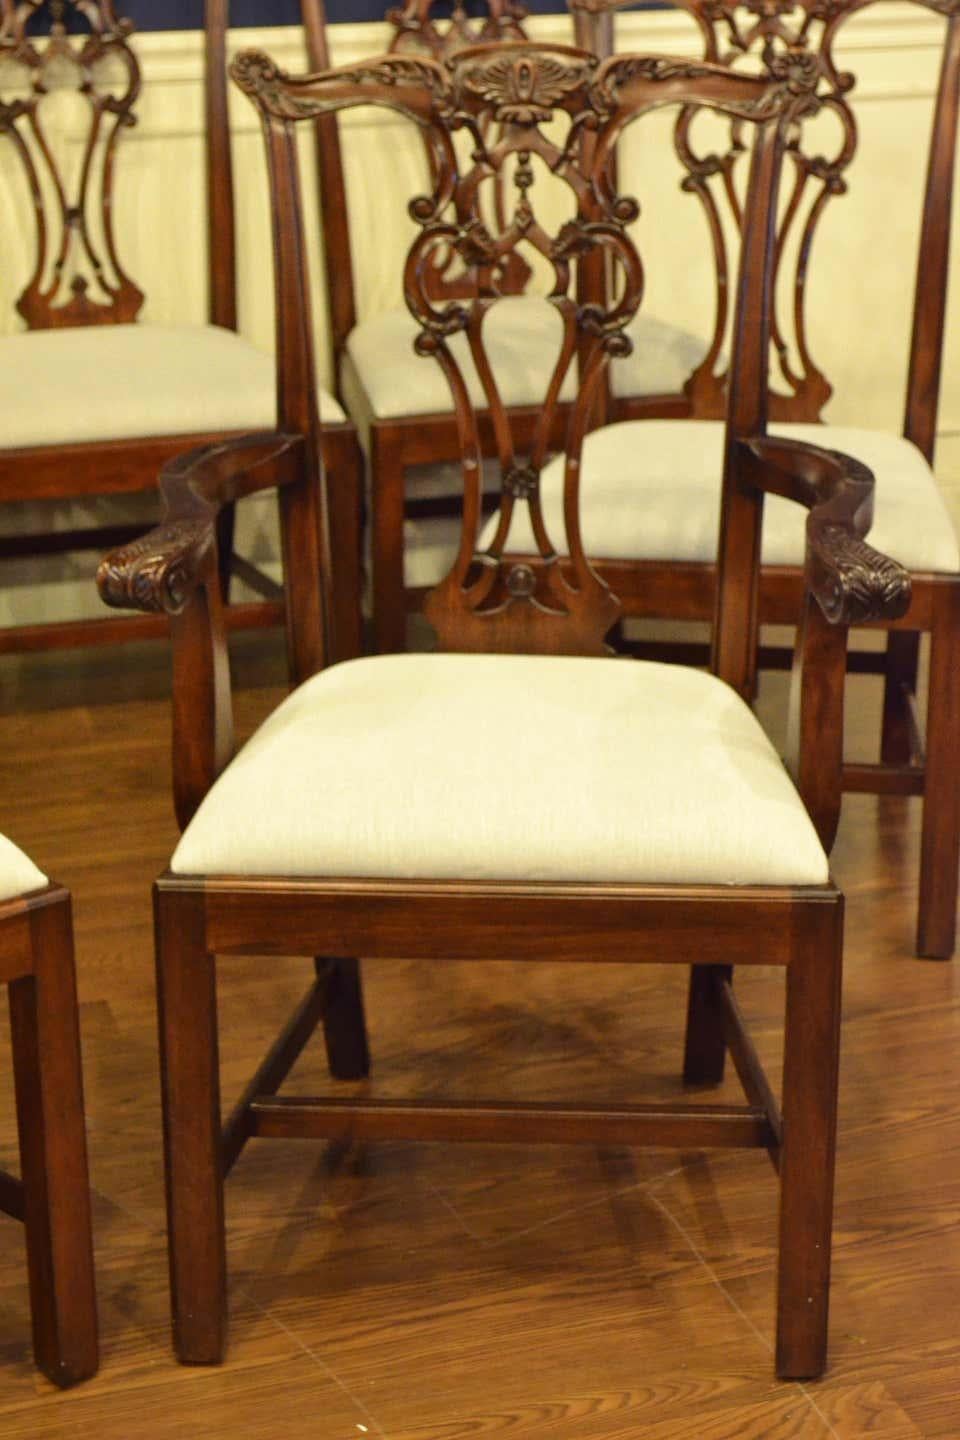 These are new traditional mahogany dining chairs. Their design was inspired by the English Chippendale style straight leg dining chairs from the Georgian period. They feature Classic Chippendale styling with straight legs and intricately carved